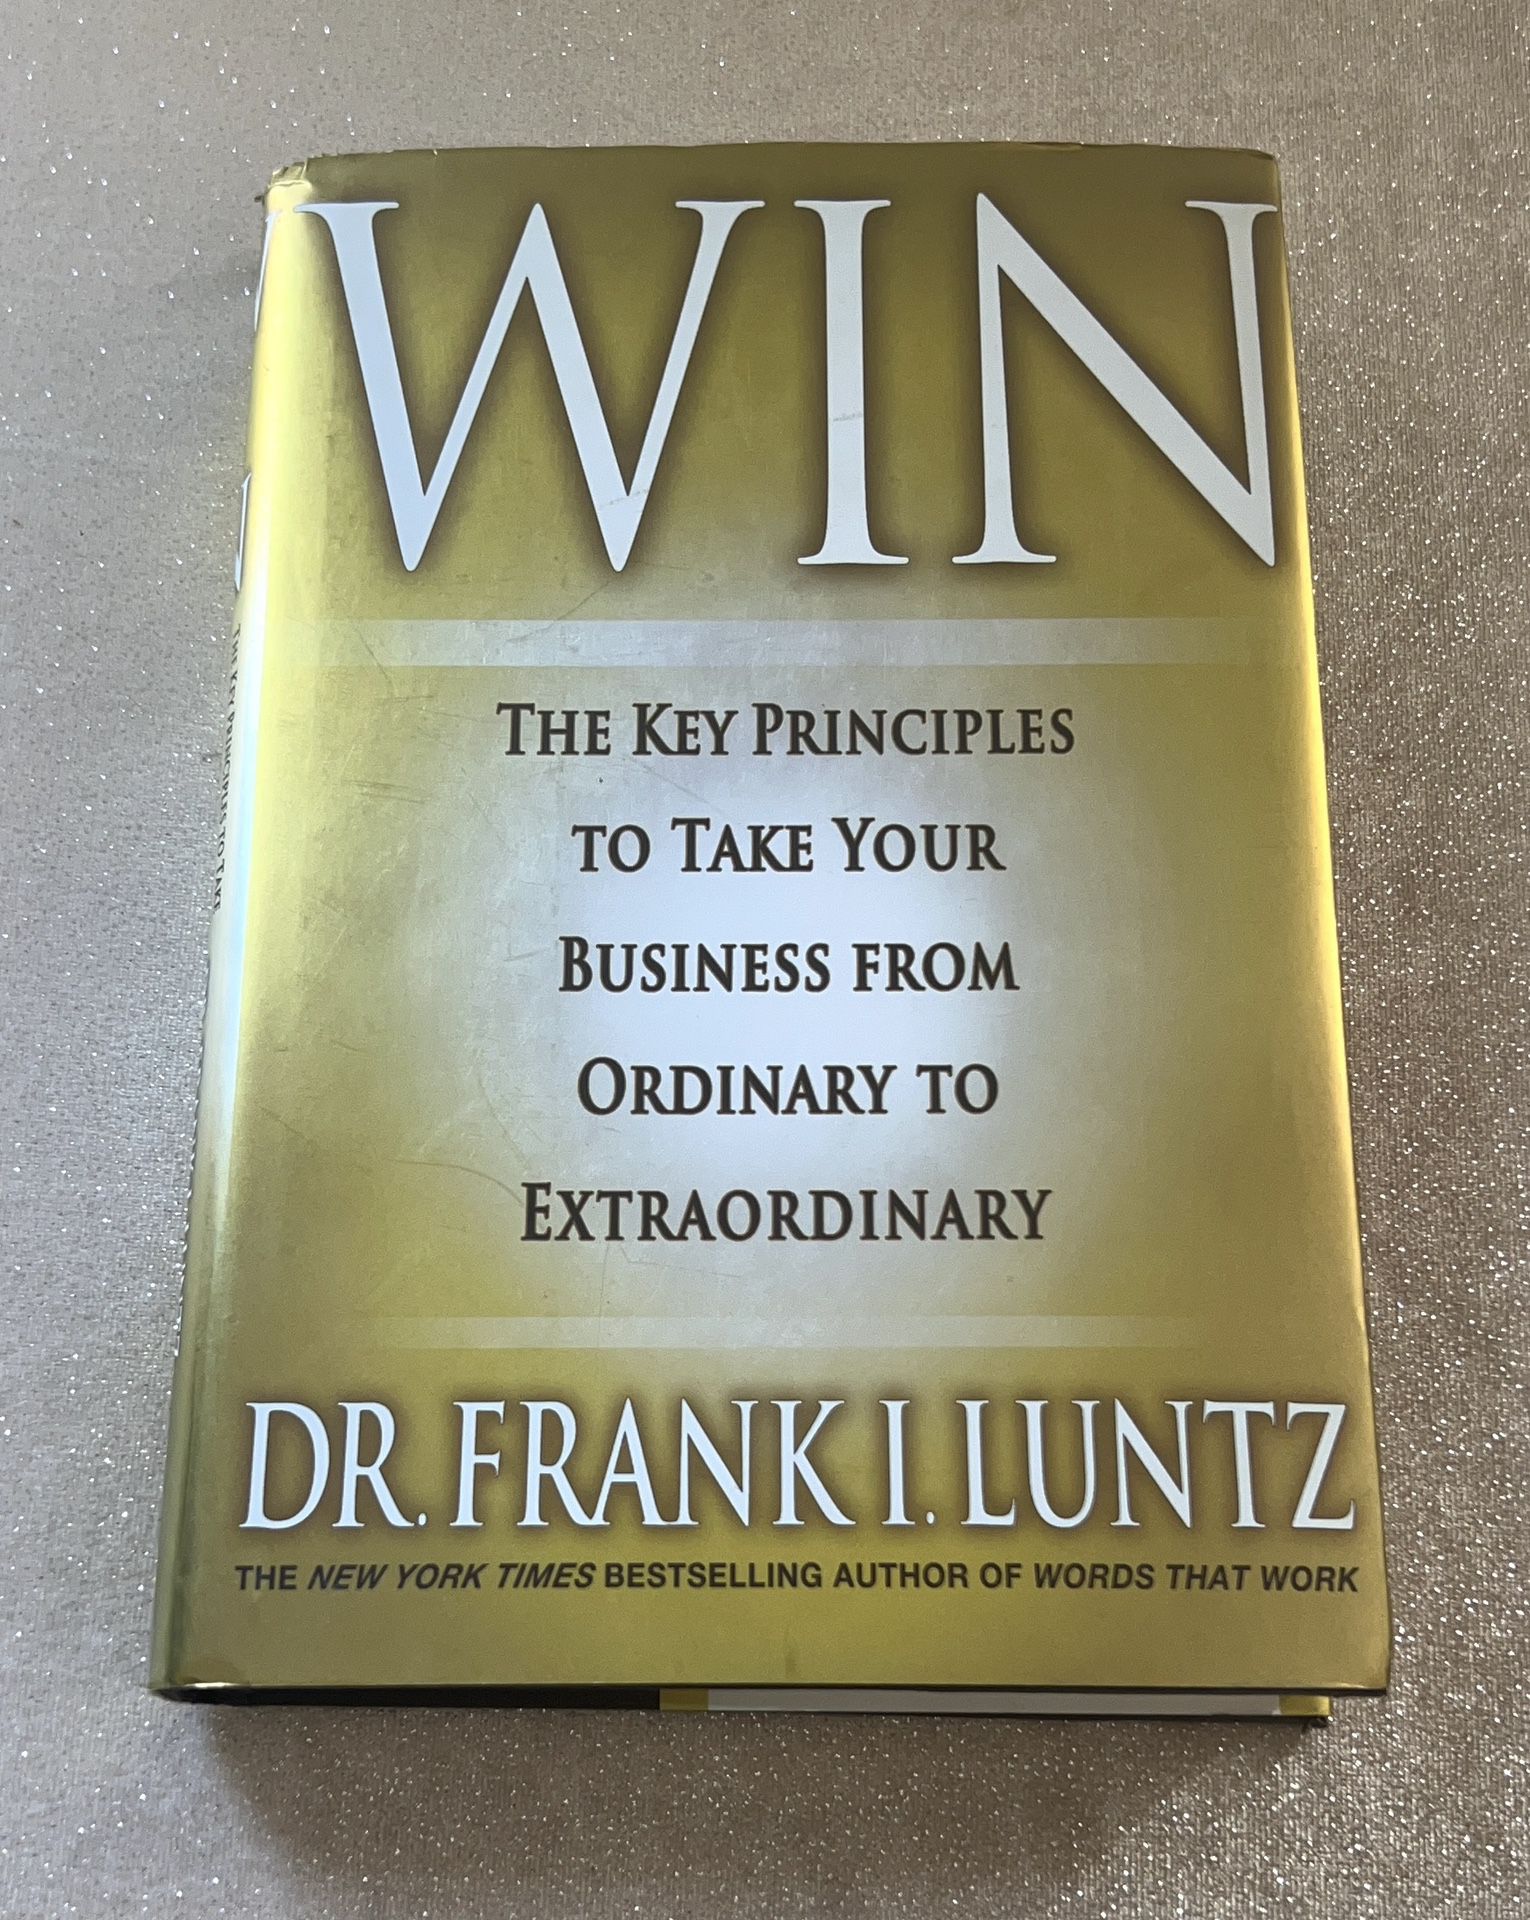 Win by Dr. Frank I. Luntz